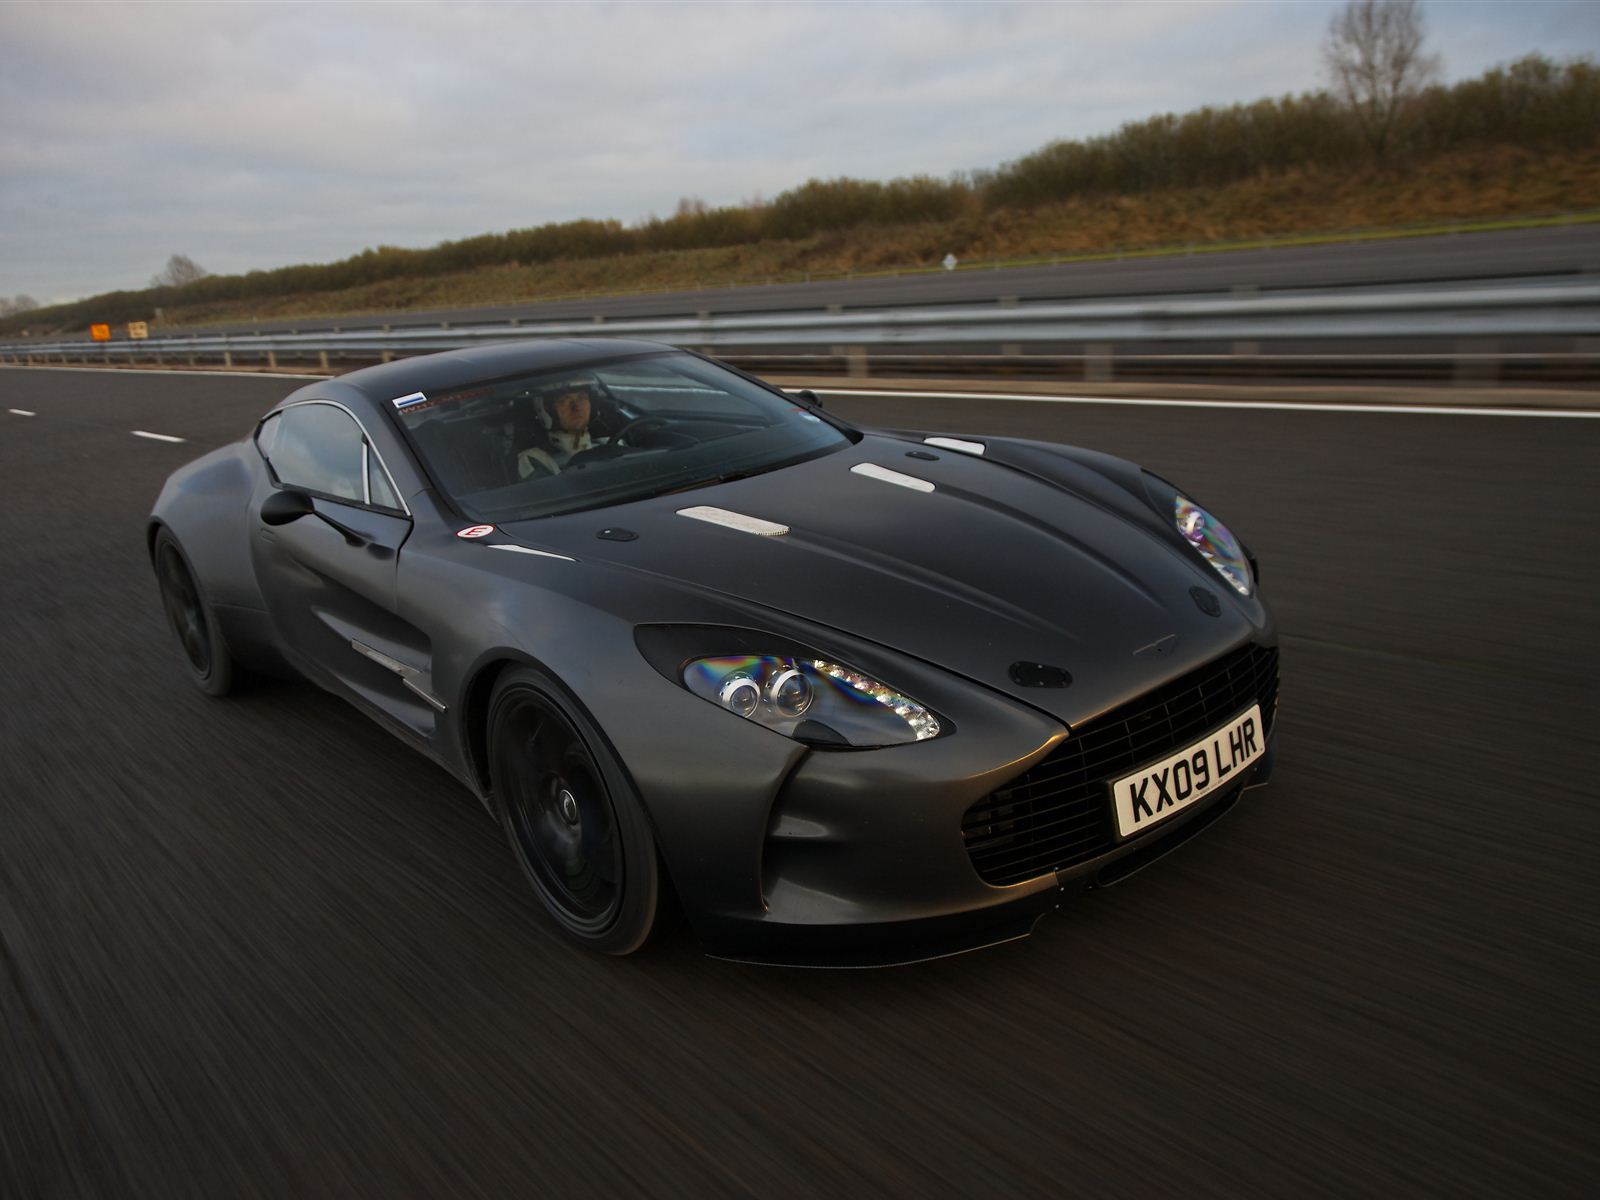 The Aston Martin One-77 is a 2 door coupe with a starting MSRP of 1,700,000Top Speed 220 MPH, 0-60 3.5 in Seconds